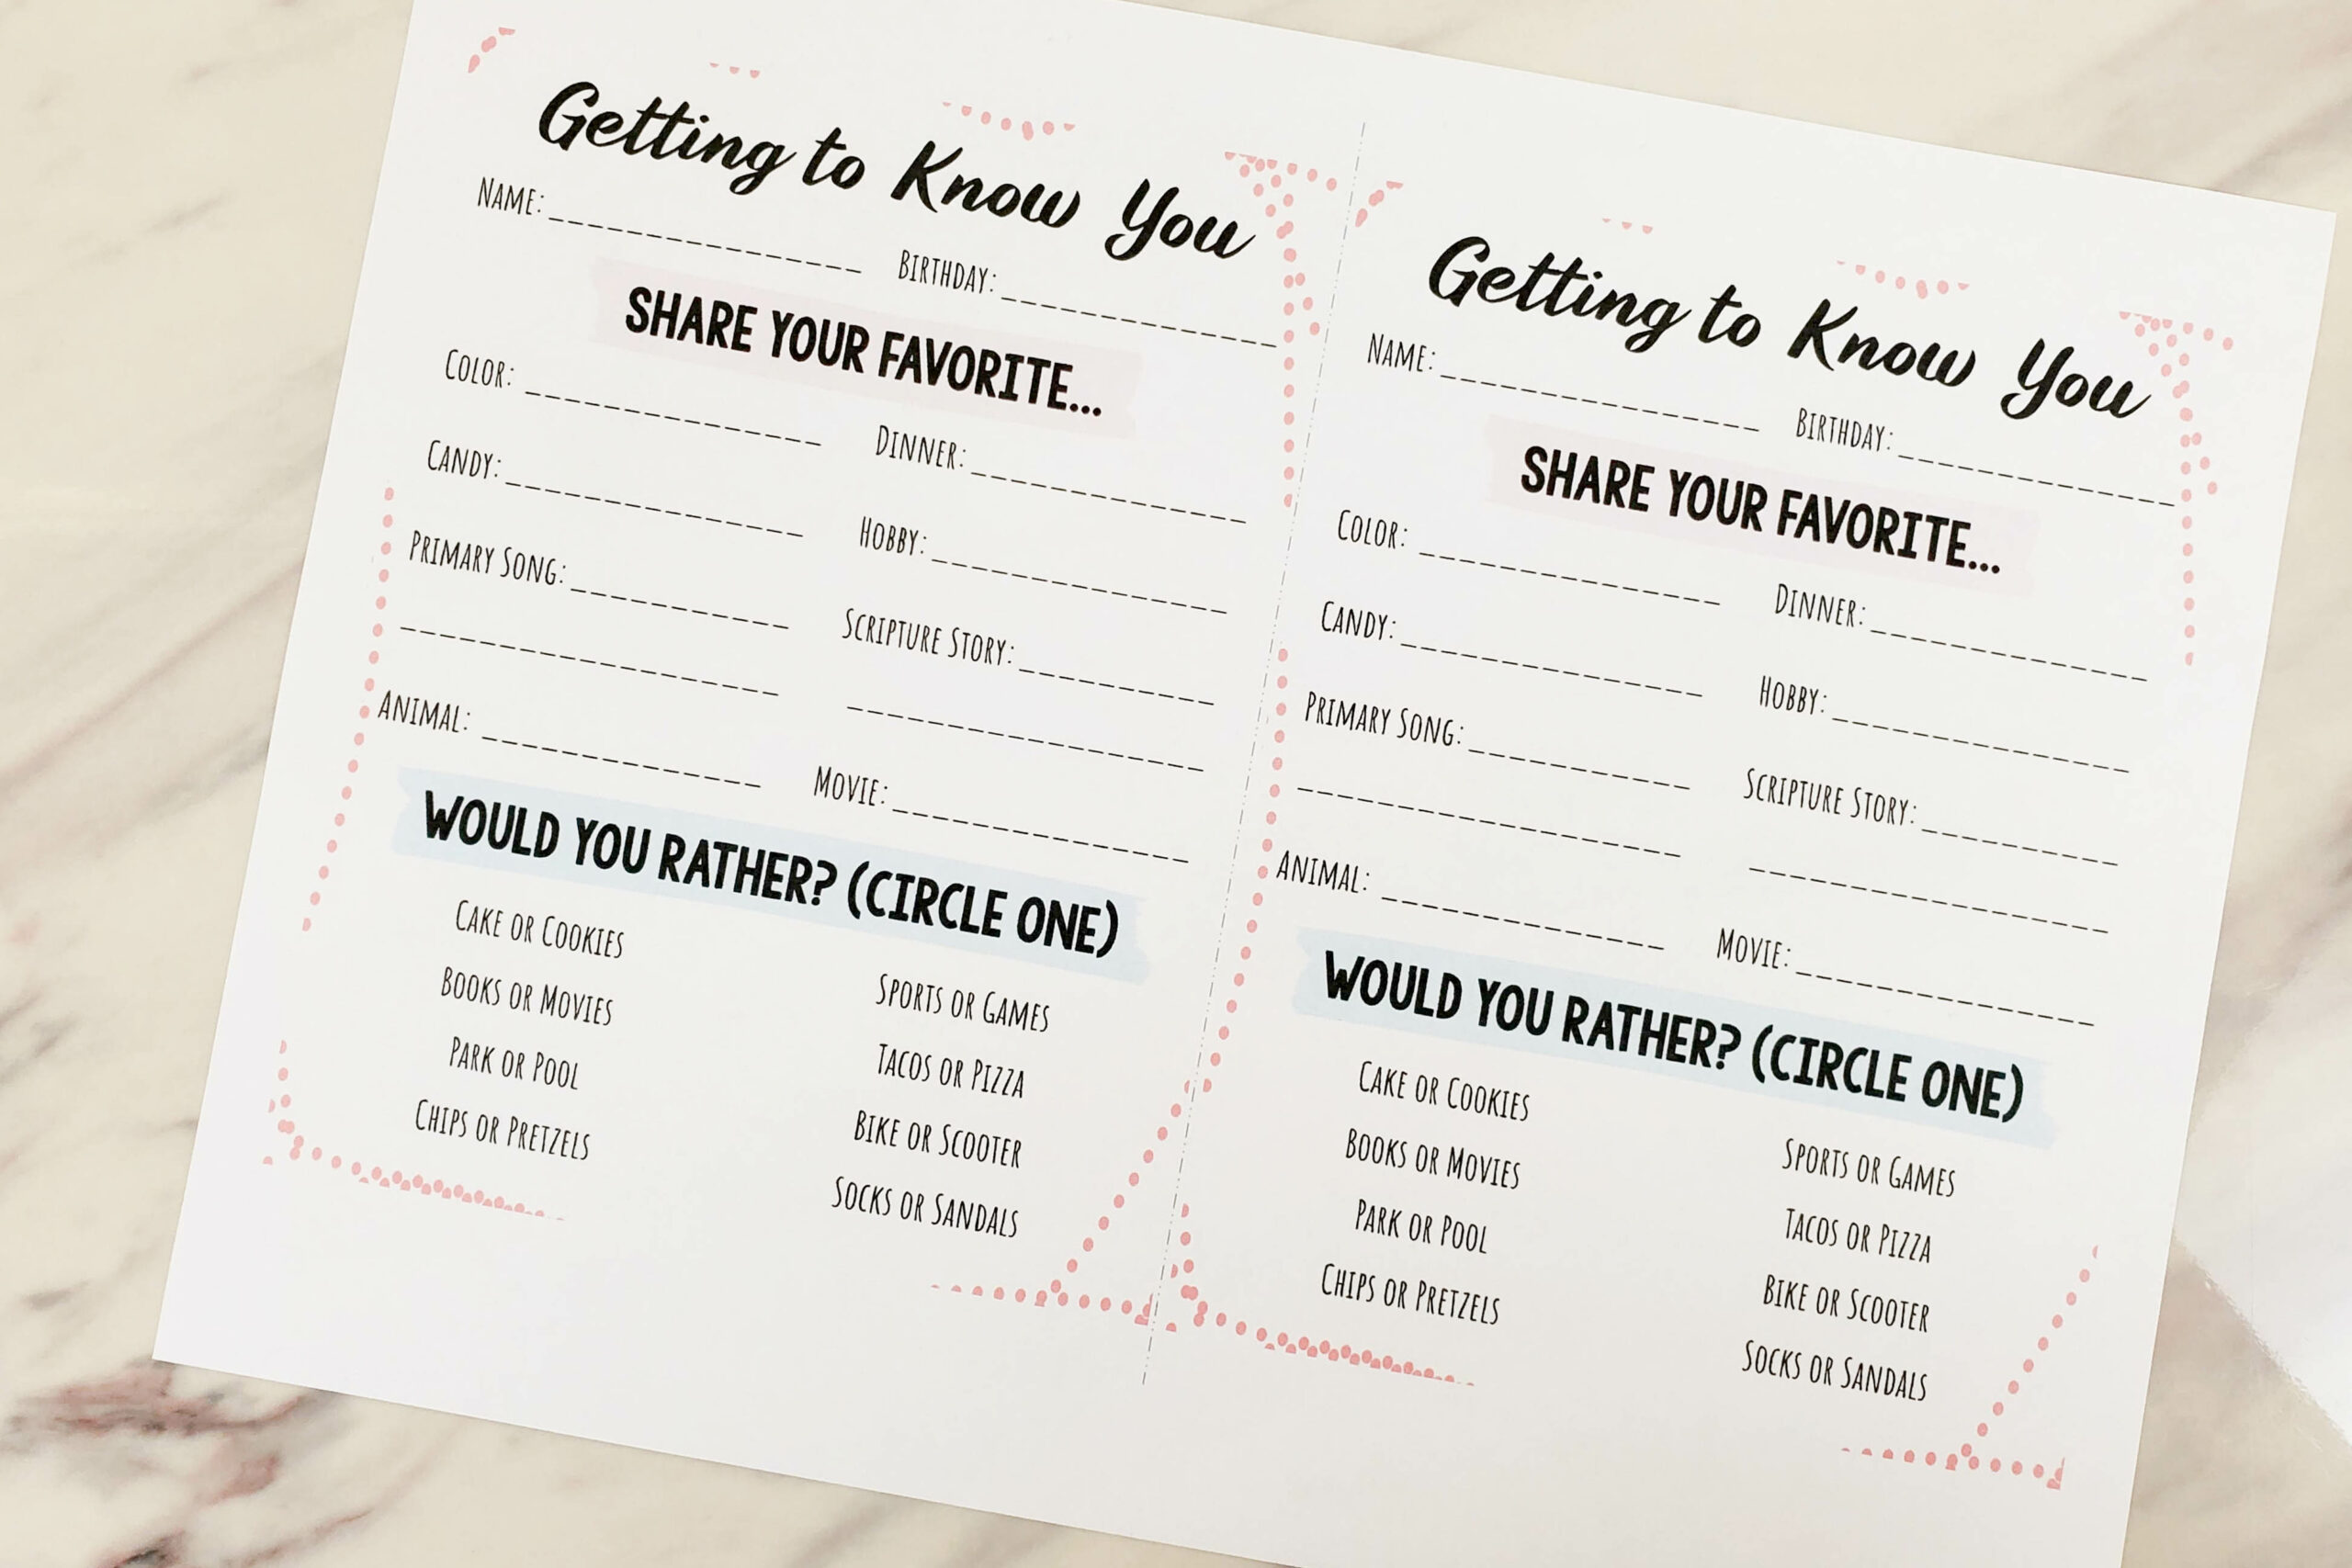 Getting to Know You Printable Survey - Fun questionnaire for LDS Primary Music Leaders or Come Follow Me for Primary Sunday School teachers! Includes a section for them to fill-in their favorites and then a section to pick which they prefer in a would you rather game! Easy ideas to use this in singing time as well.